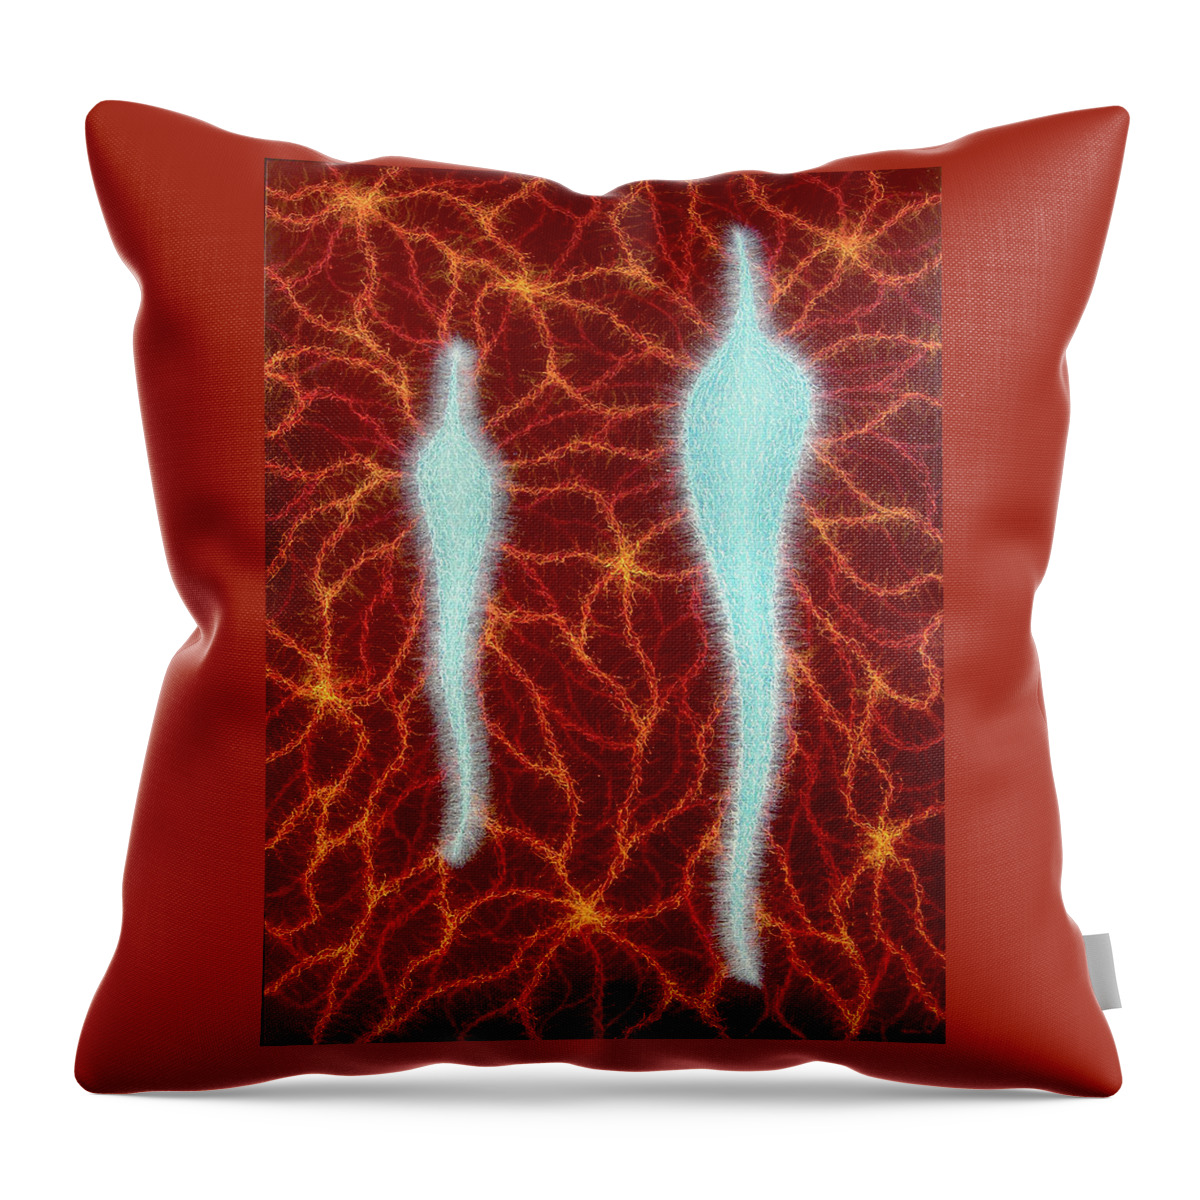 Color Throw Pillow featuring the painting Two Two by Stephen Mauldin